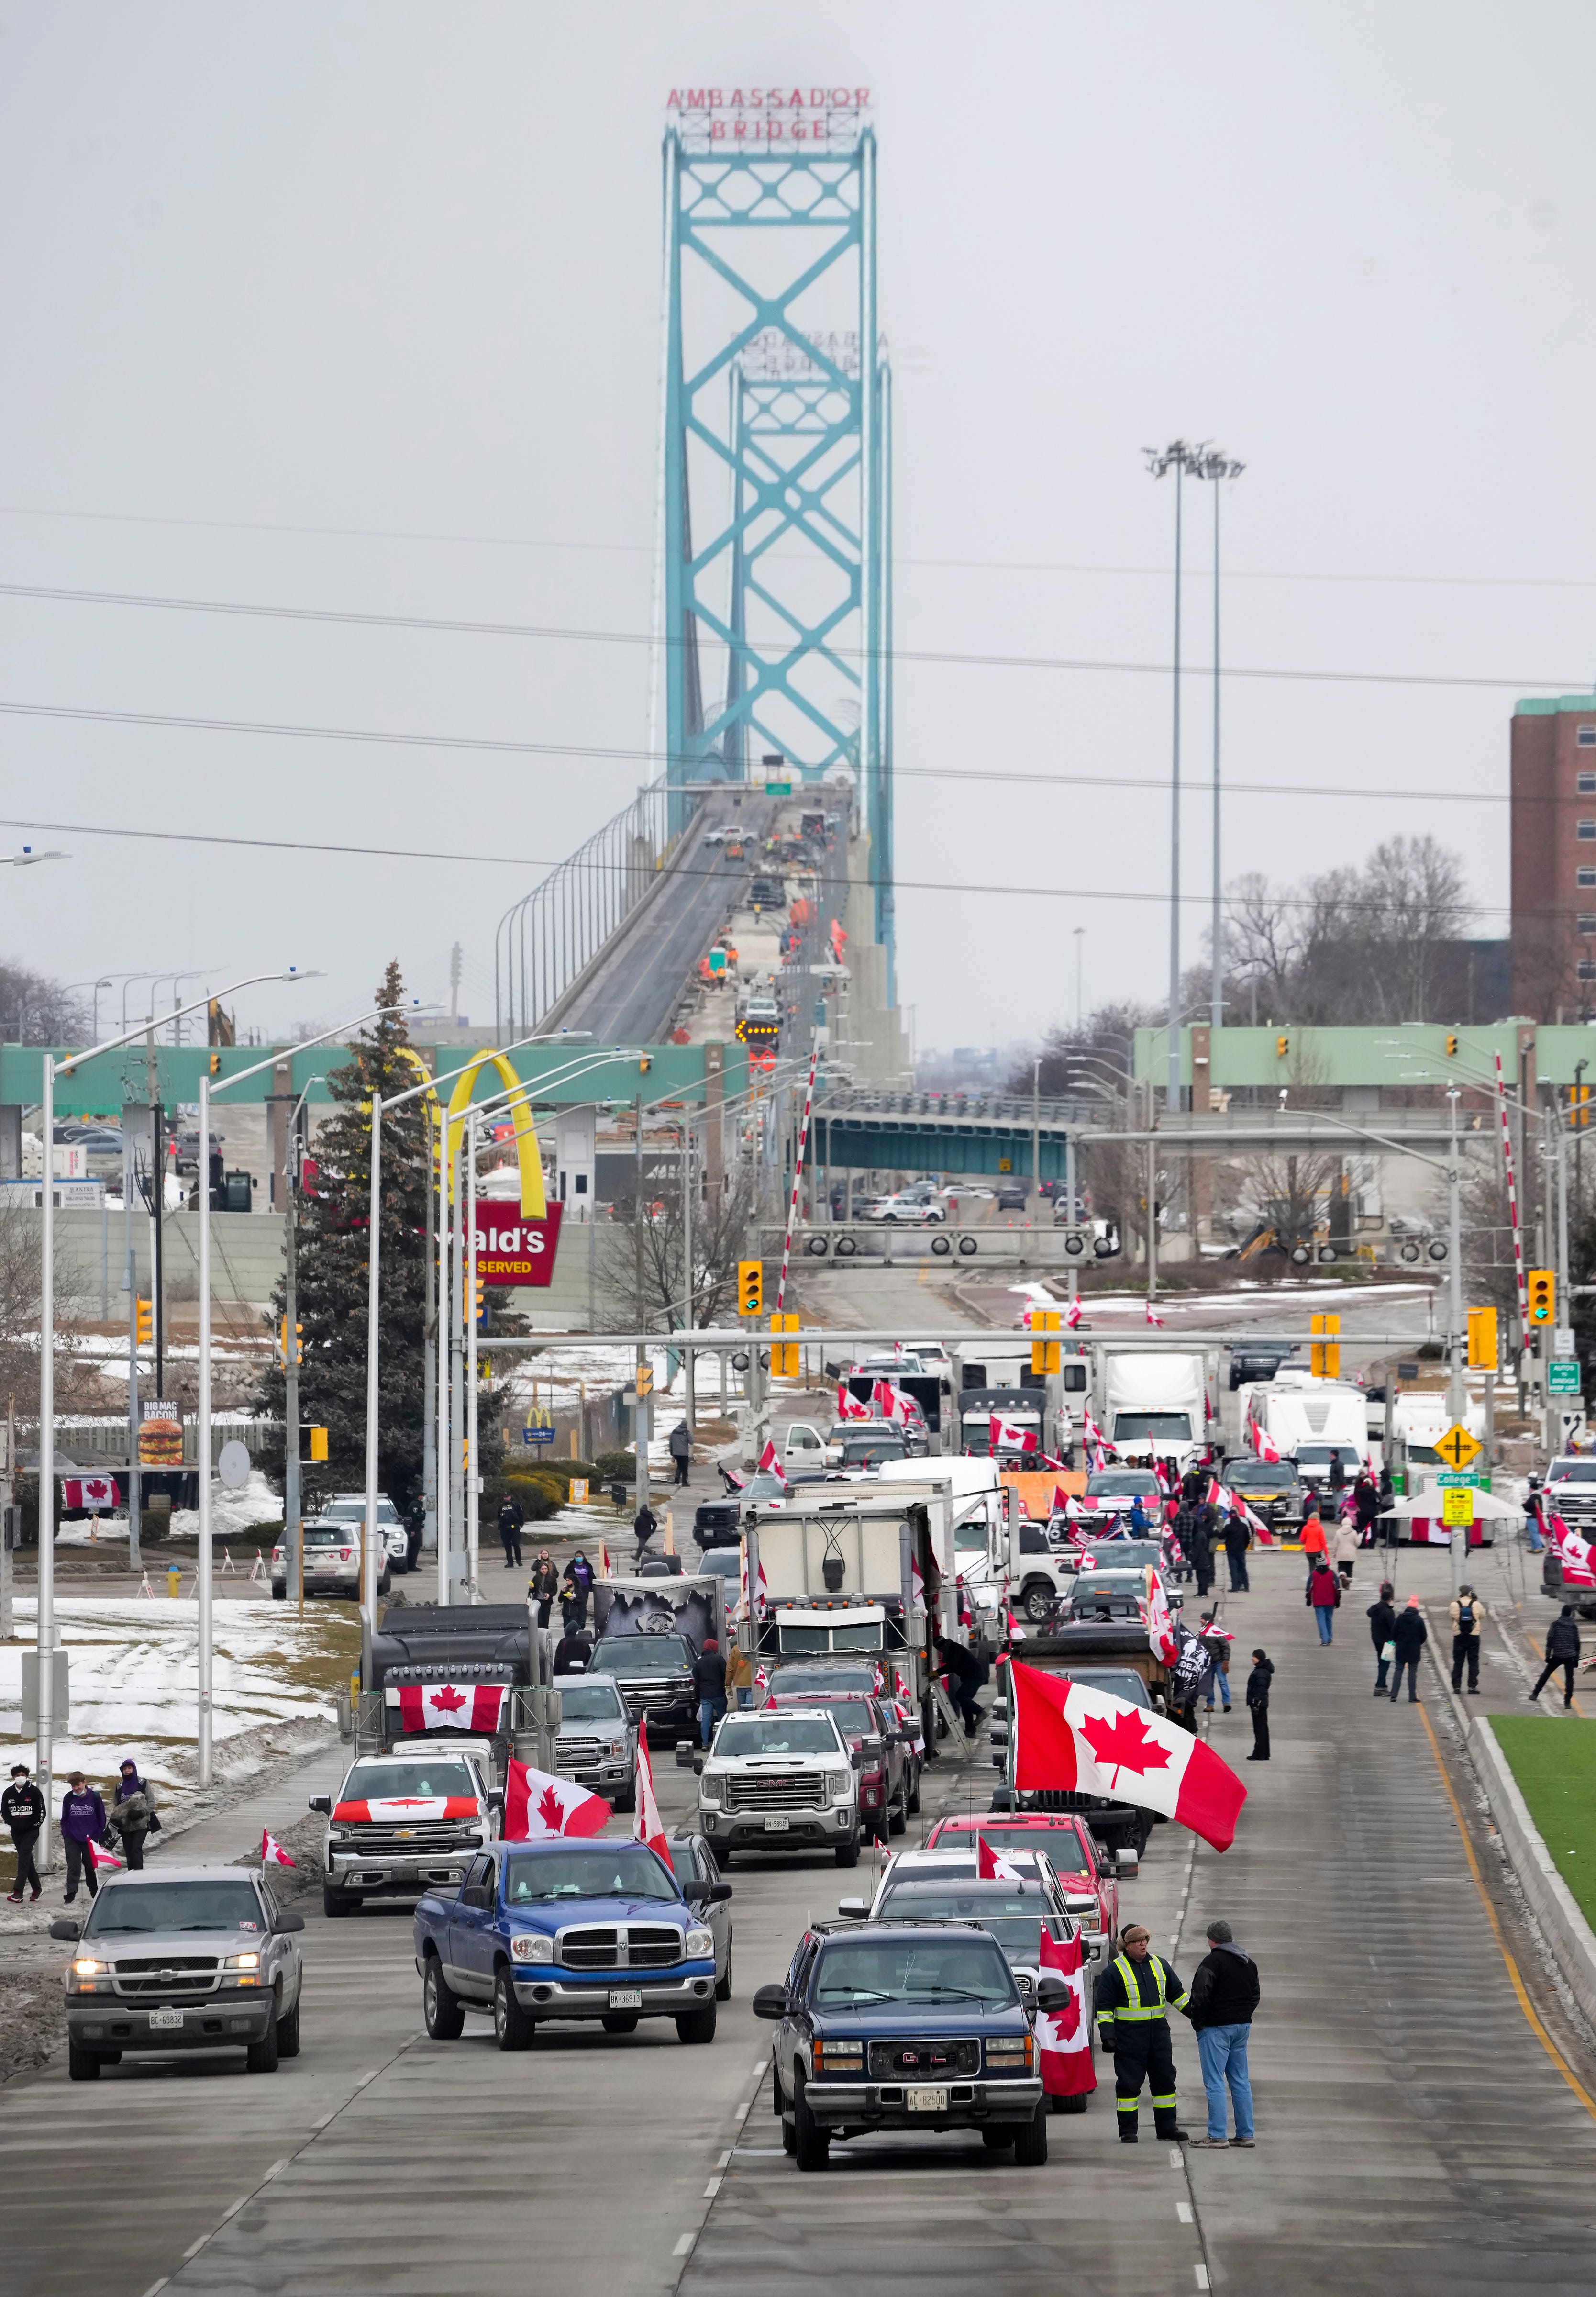 Truckers and supporters block the access leading from the Ambassador Bridge, linking Detroit and Windsor, as truckers and their supporters continue to protest against COVID-19 vaccine mandates and restrictions, in Windsor, Ont., Thursday, Feb. 10, 2022.